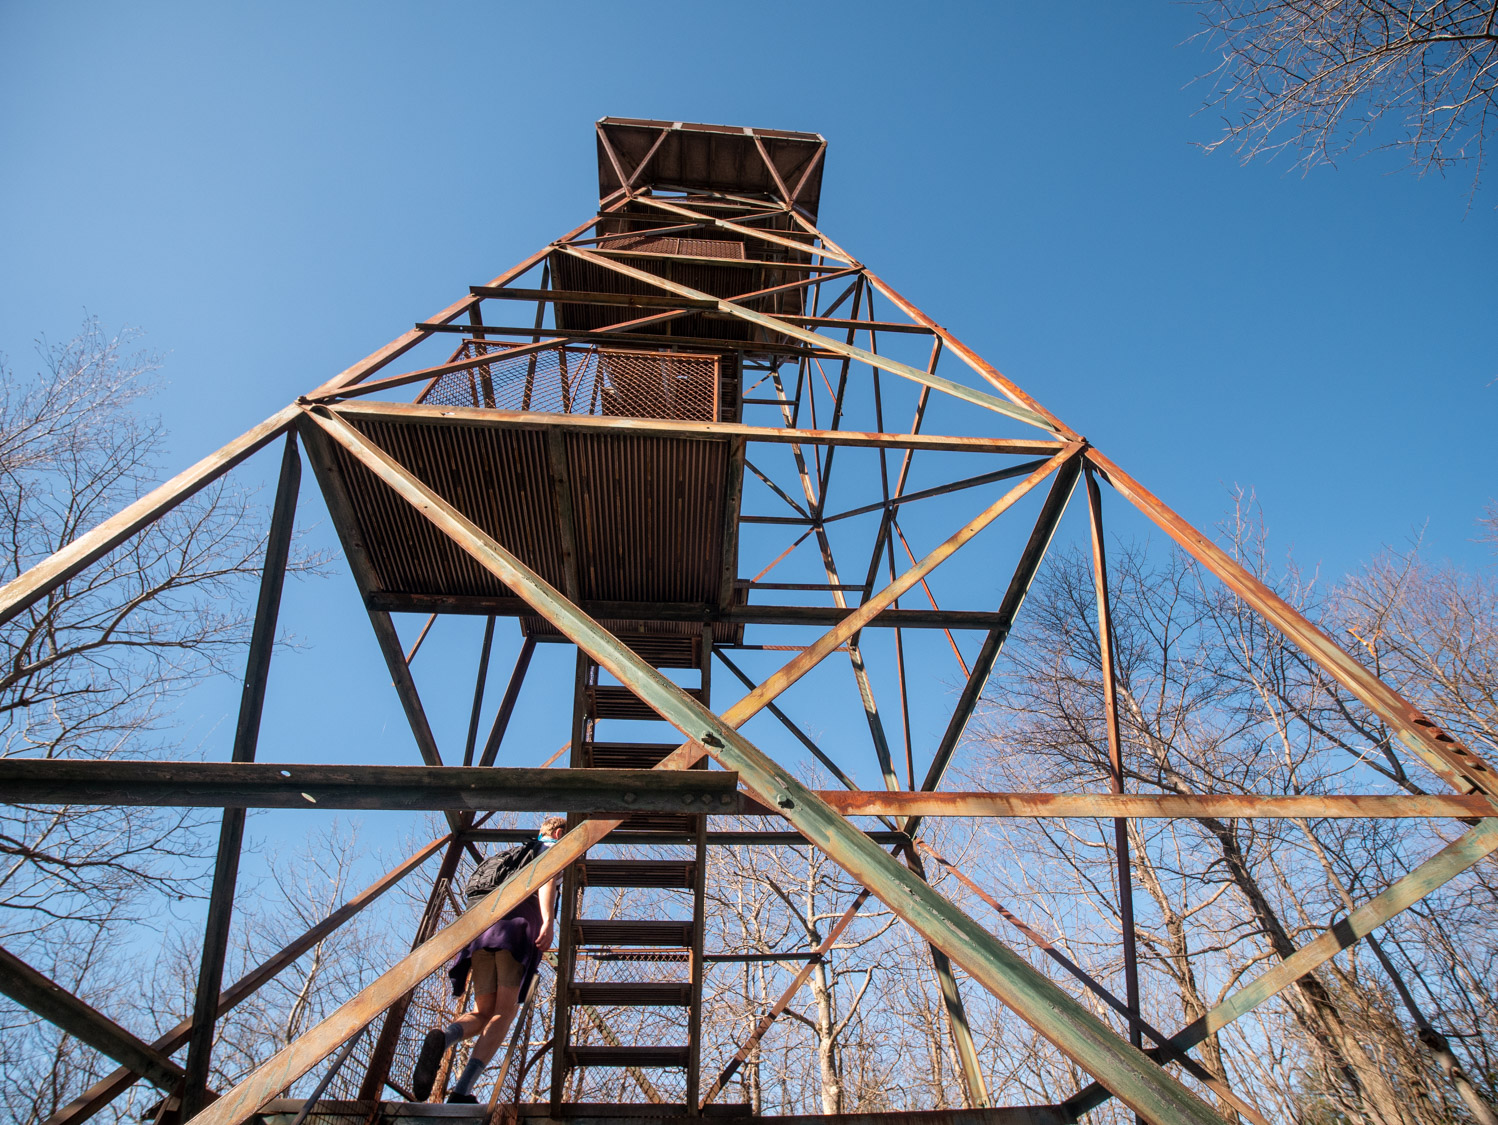 A closer view of the rusting edifice that is the observation tower.